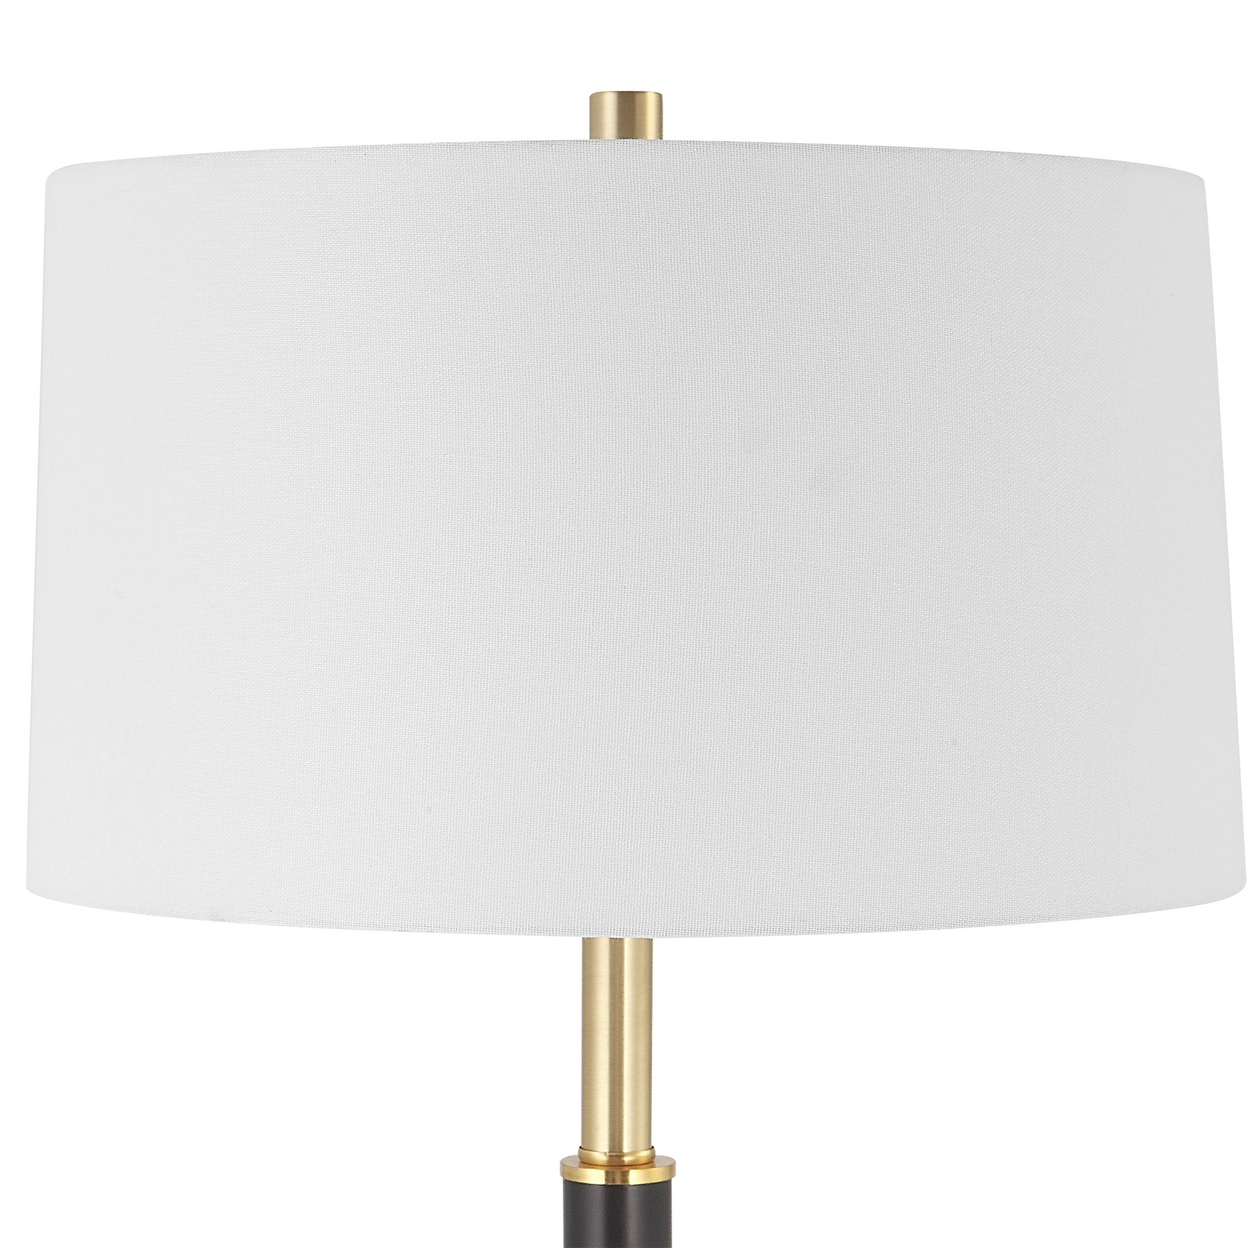 62 Inch Floor Lamp, White Tapered Hardback Shade, Black With Gold Accents -Saltoro Sherpi